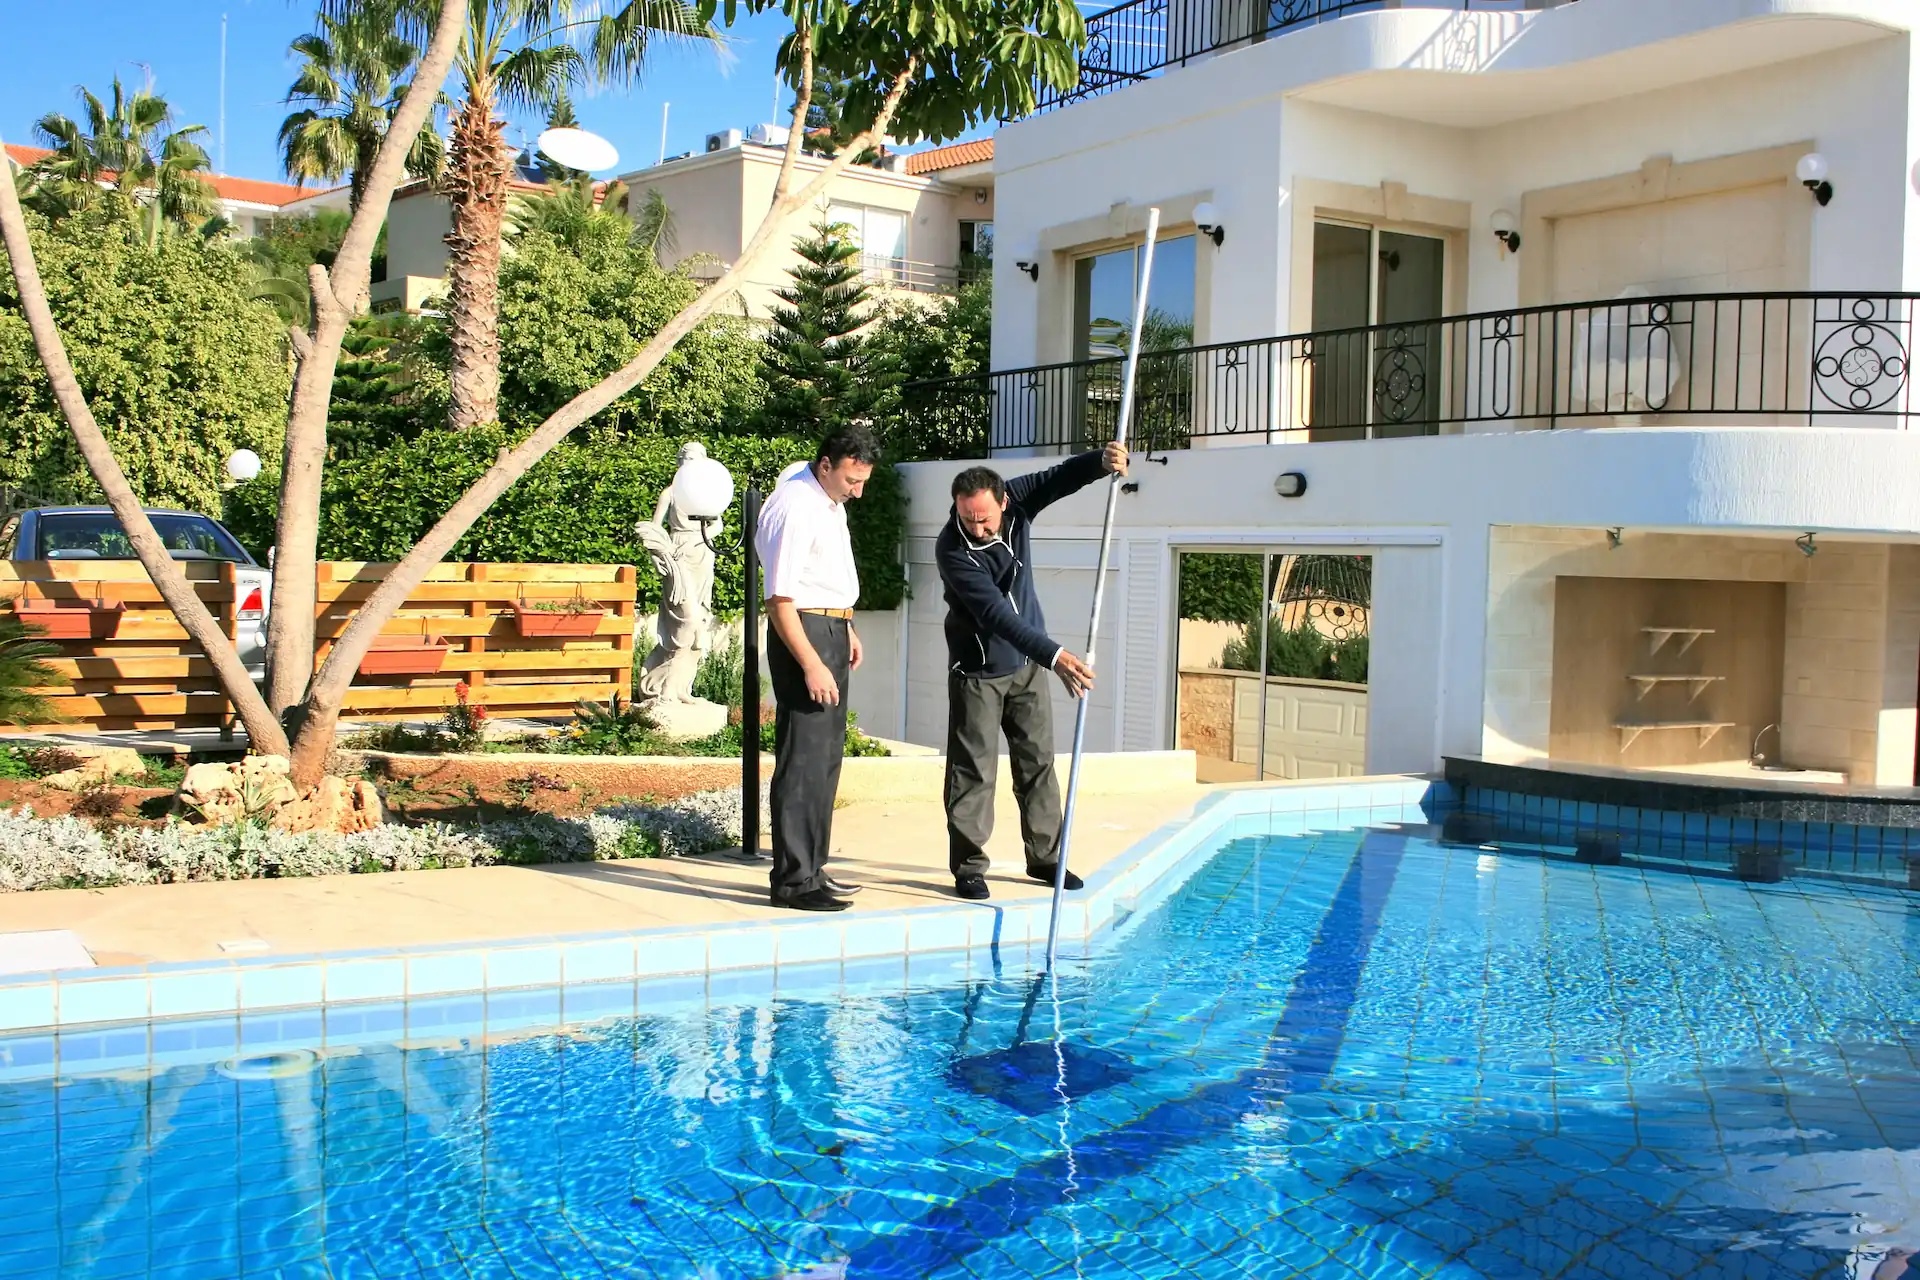 Medium shot of a pool maintenance worker vacuuming an inground pool as a pool owner observes. A pool maintenance service like this is one way to make pool customers' lives easier.